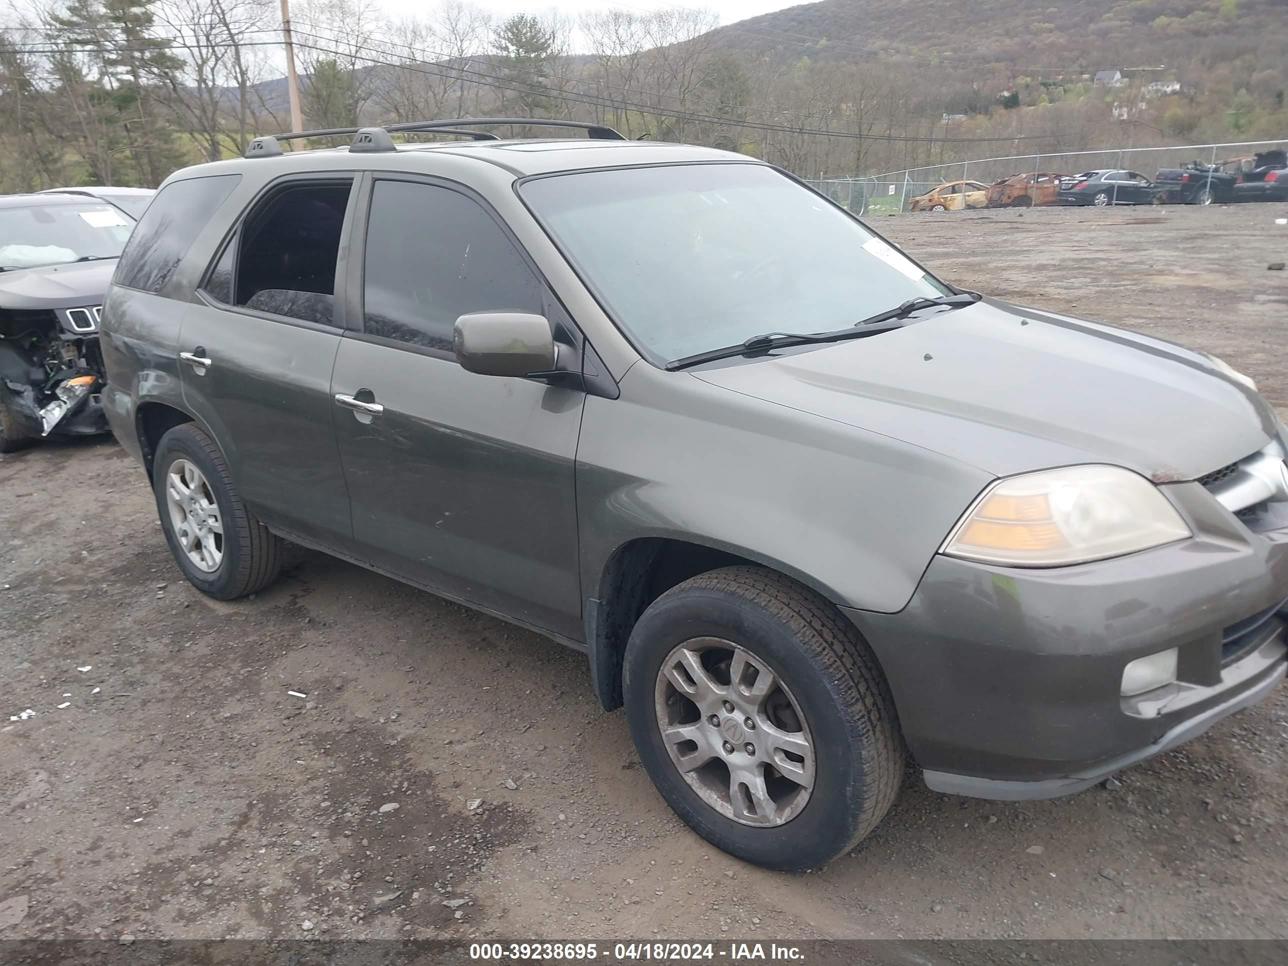 vin: 2HNYD18696H520170 2HNYD18696H520170 2006 acura mdx 3500 for Sale in 07865, 985 State Route 57, Port Murray, Pennsylvania, USA